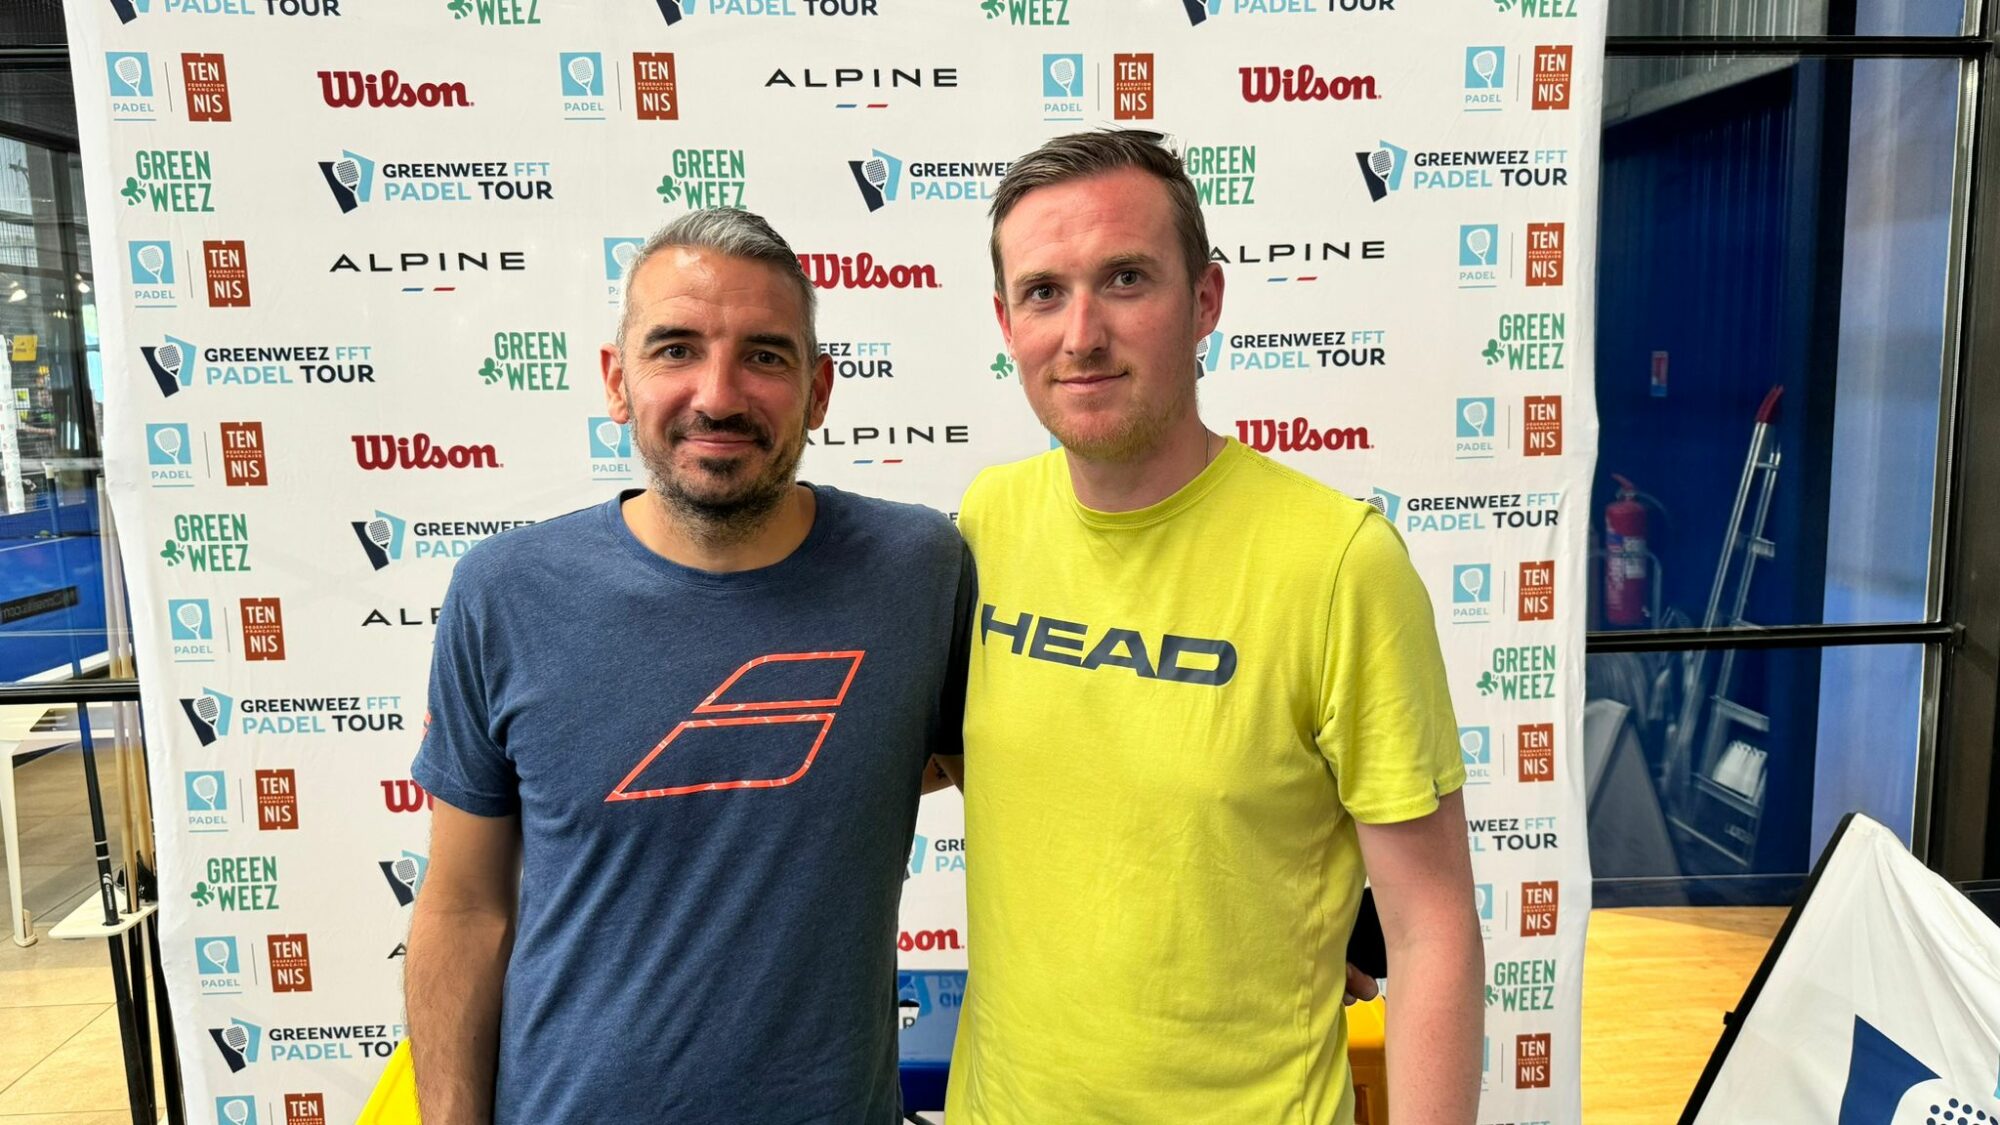 Simon Boissé and Maxime Bourgoin: “The padel today it’s all about fun!”